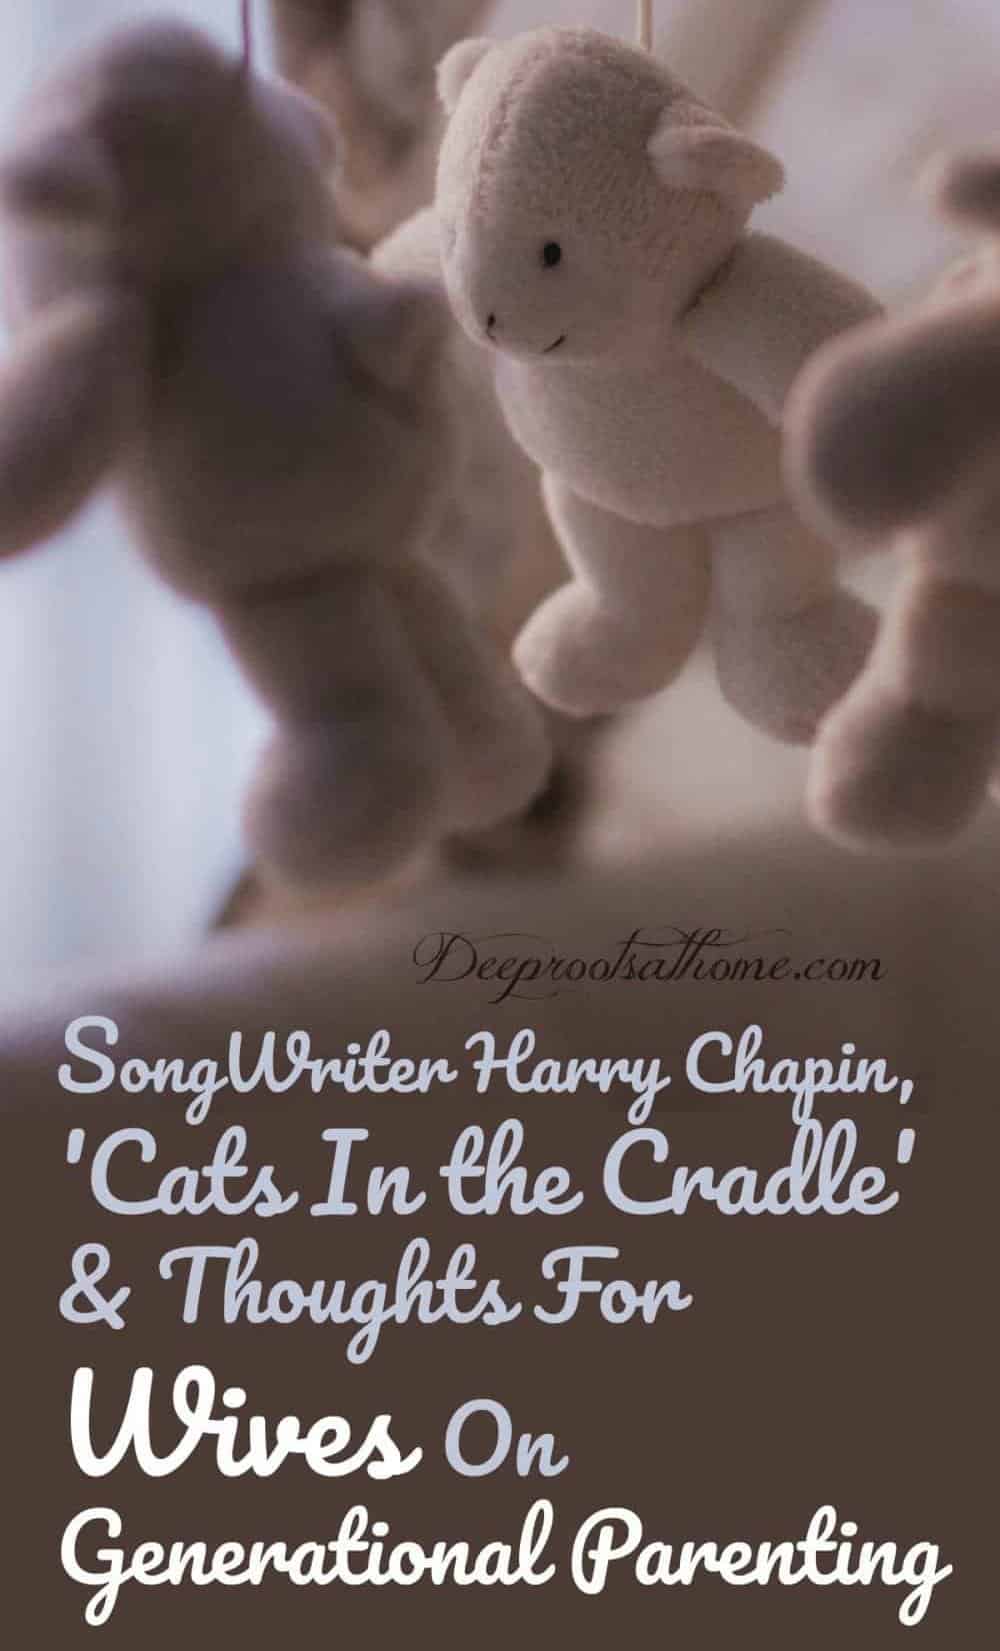 Harry Chapin, 'Cats In the Cradle' & Thoughts On Generational Parenting. A teddy bear mobile in baby nursery